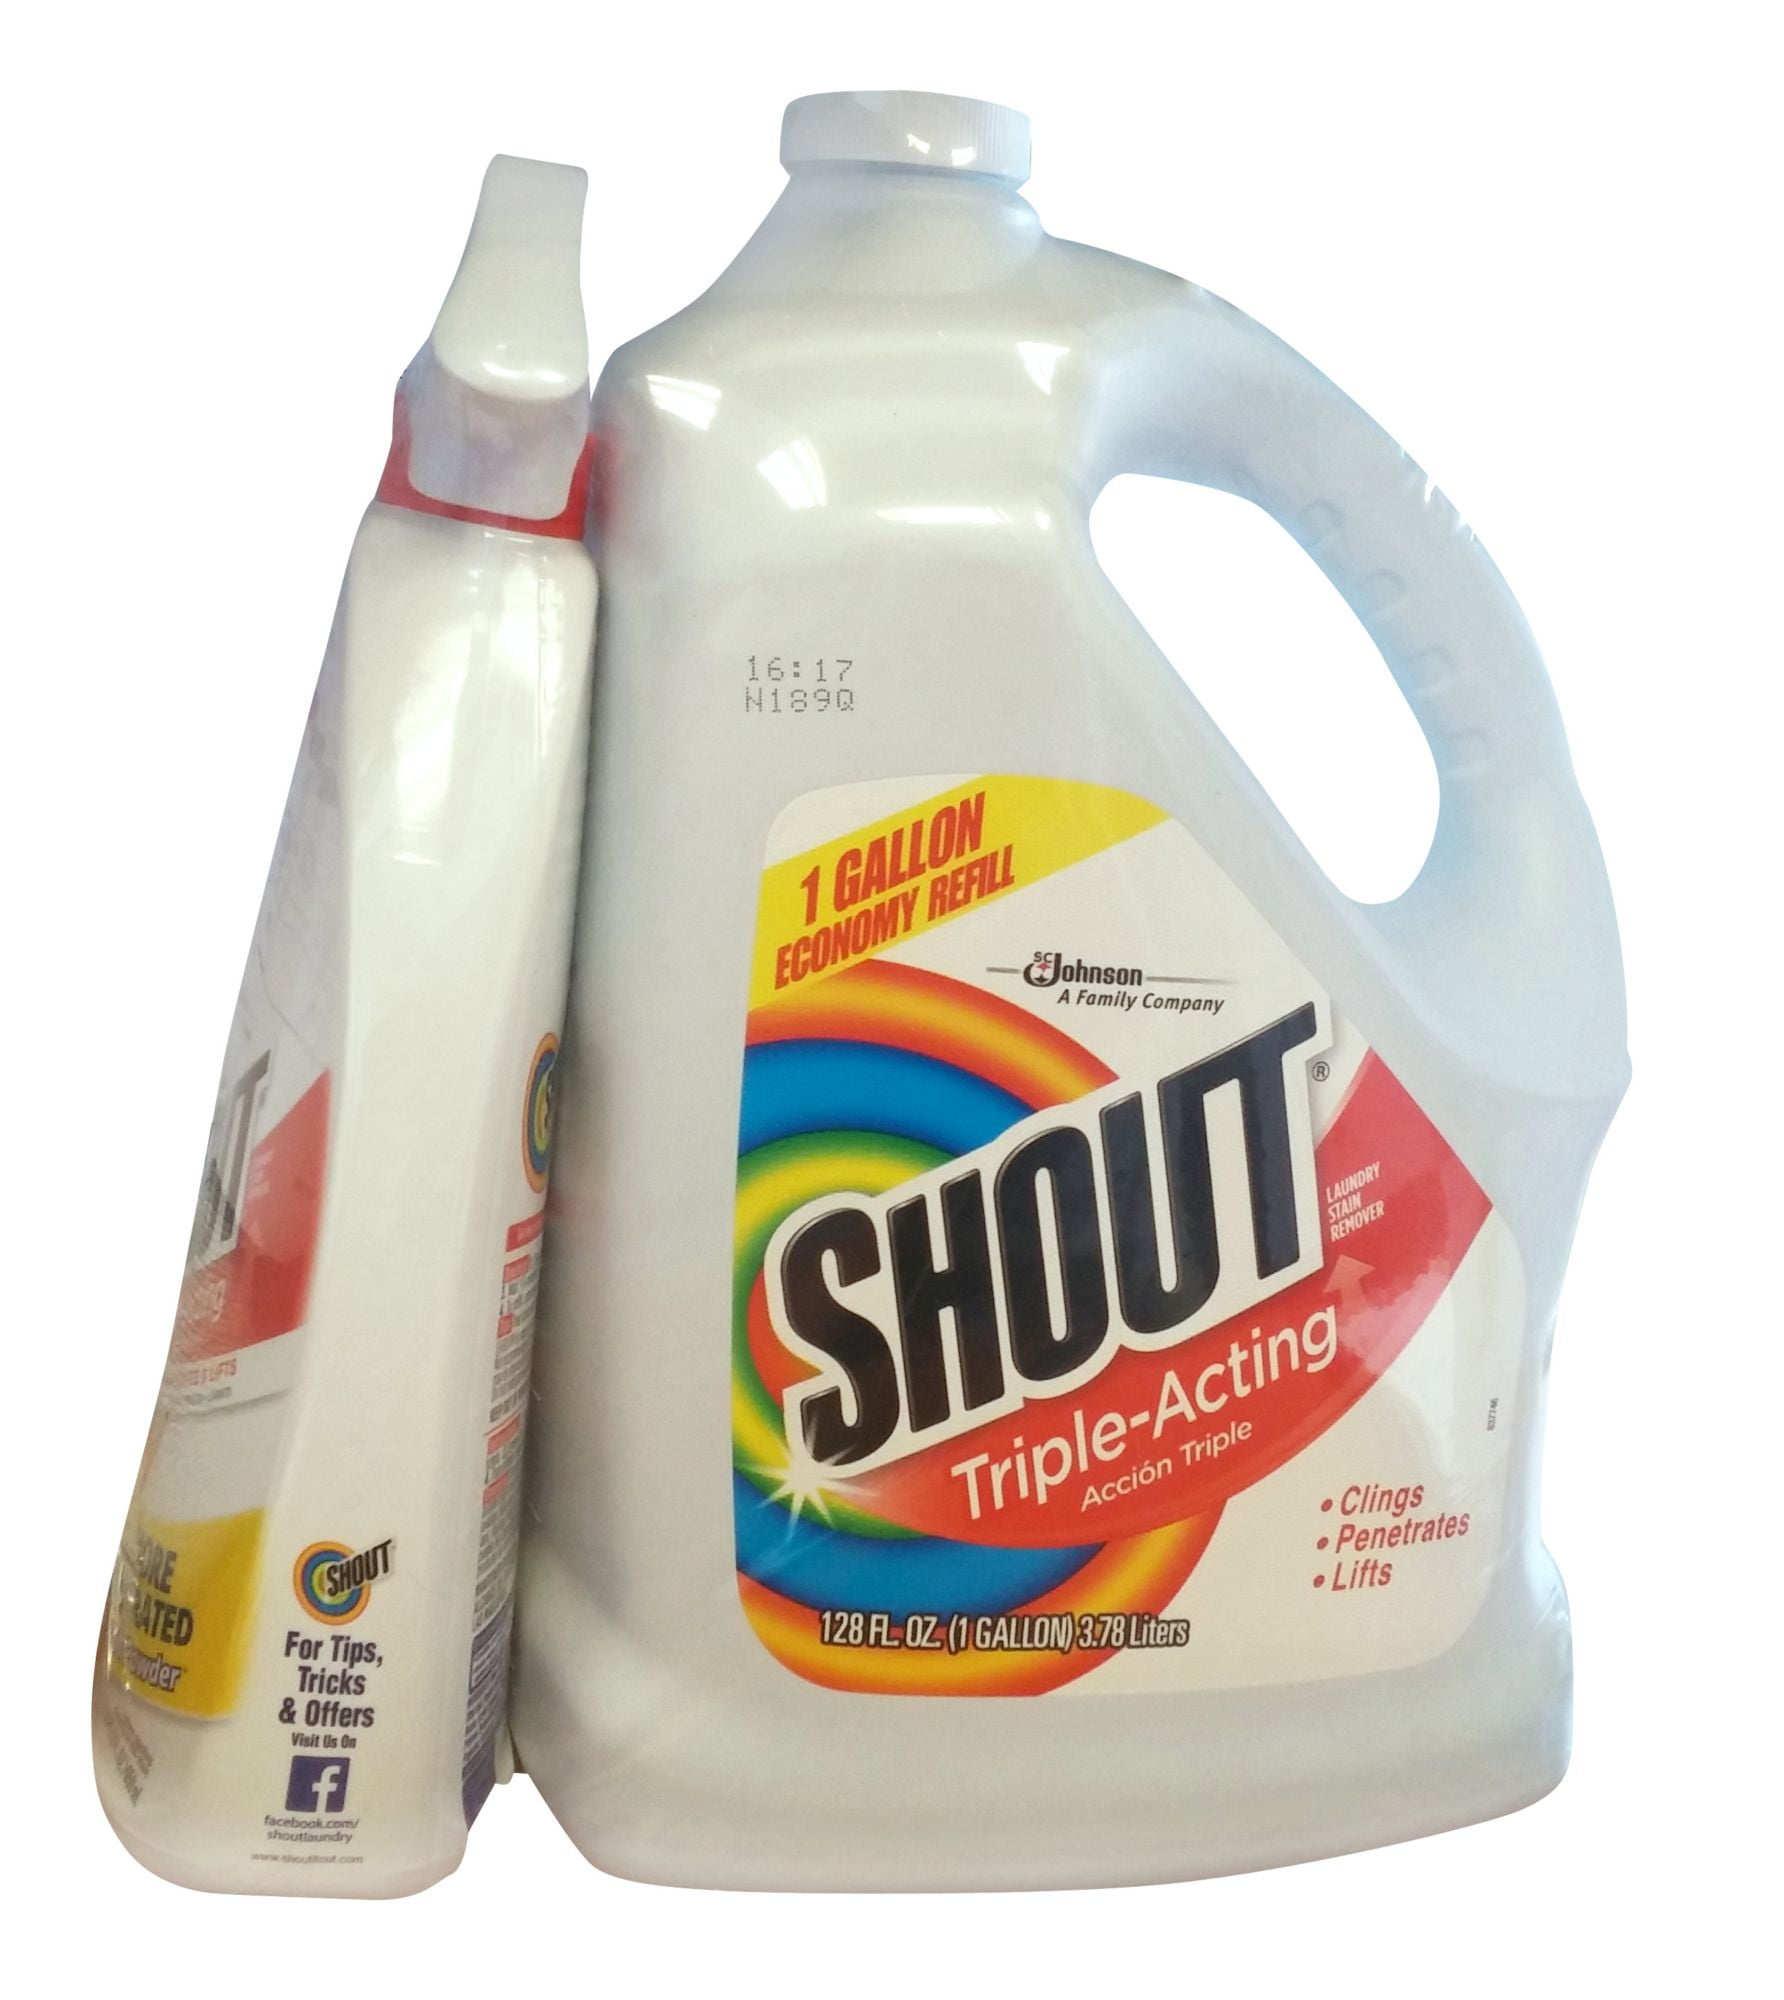 Shout Advanced Action Gel Stain Remover Refill, Shop